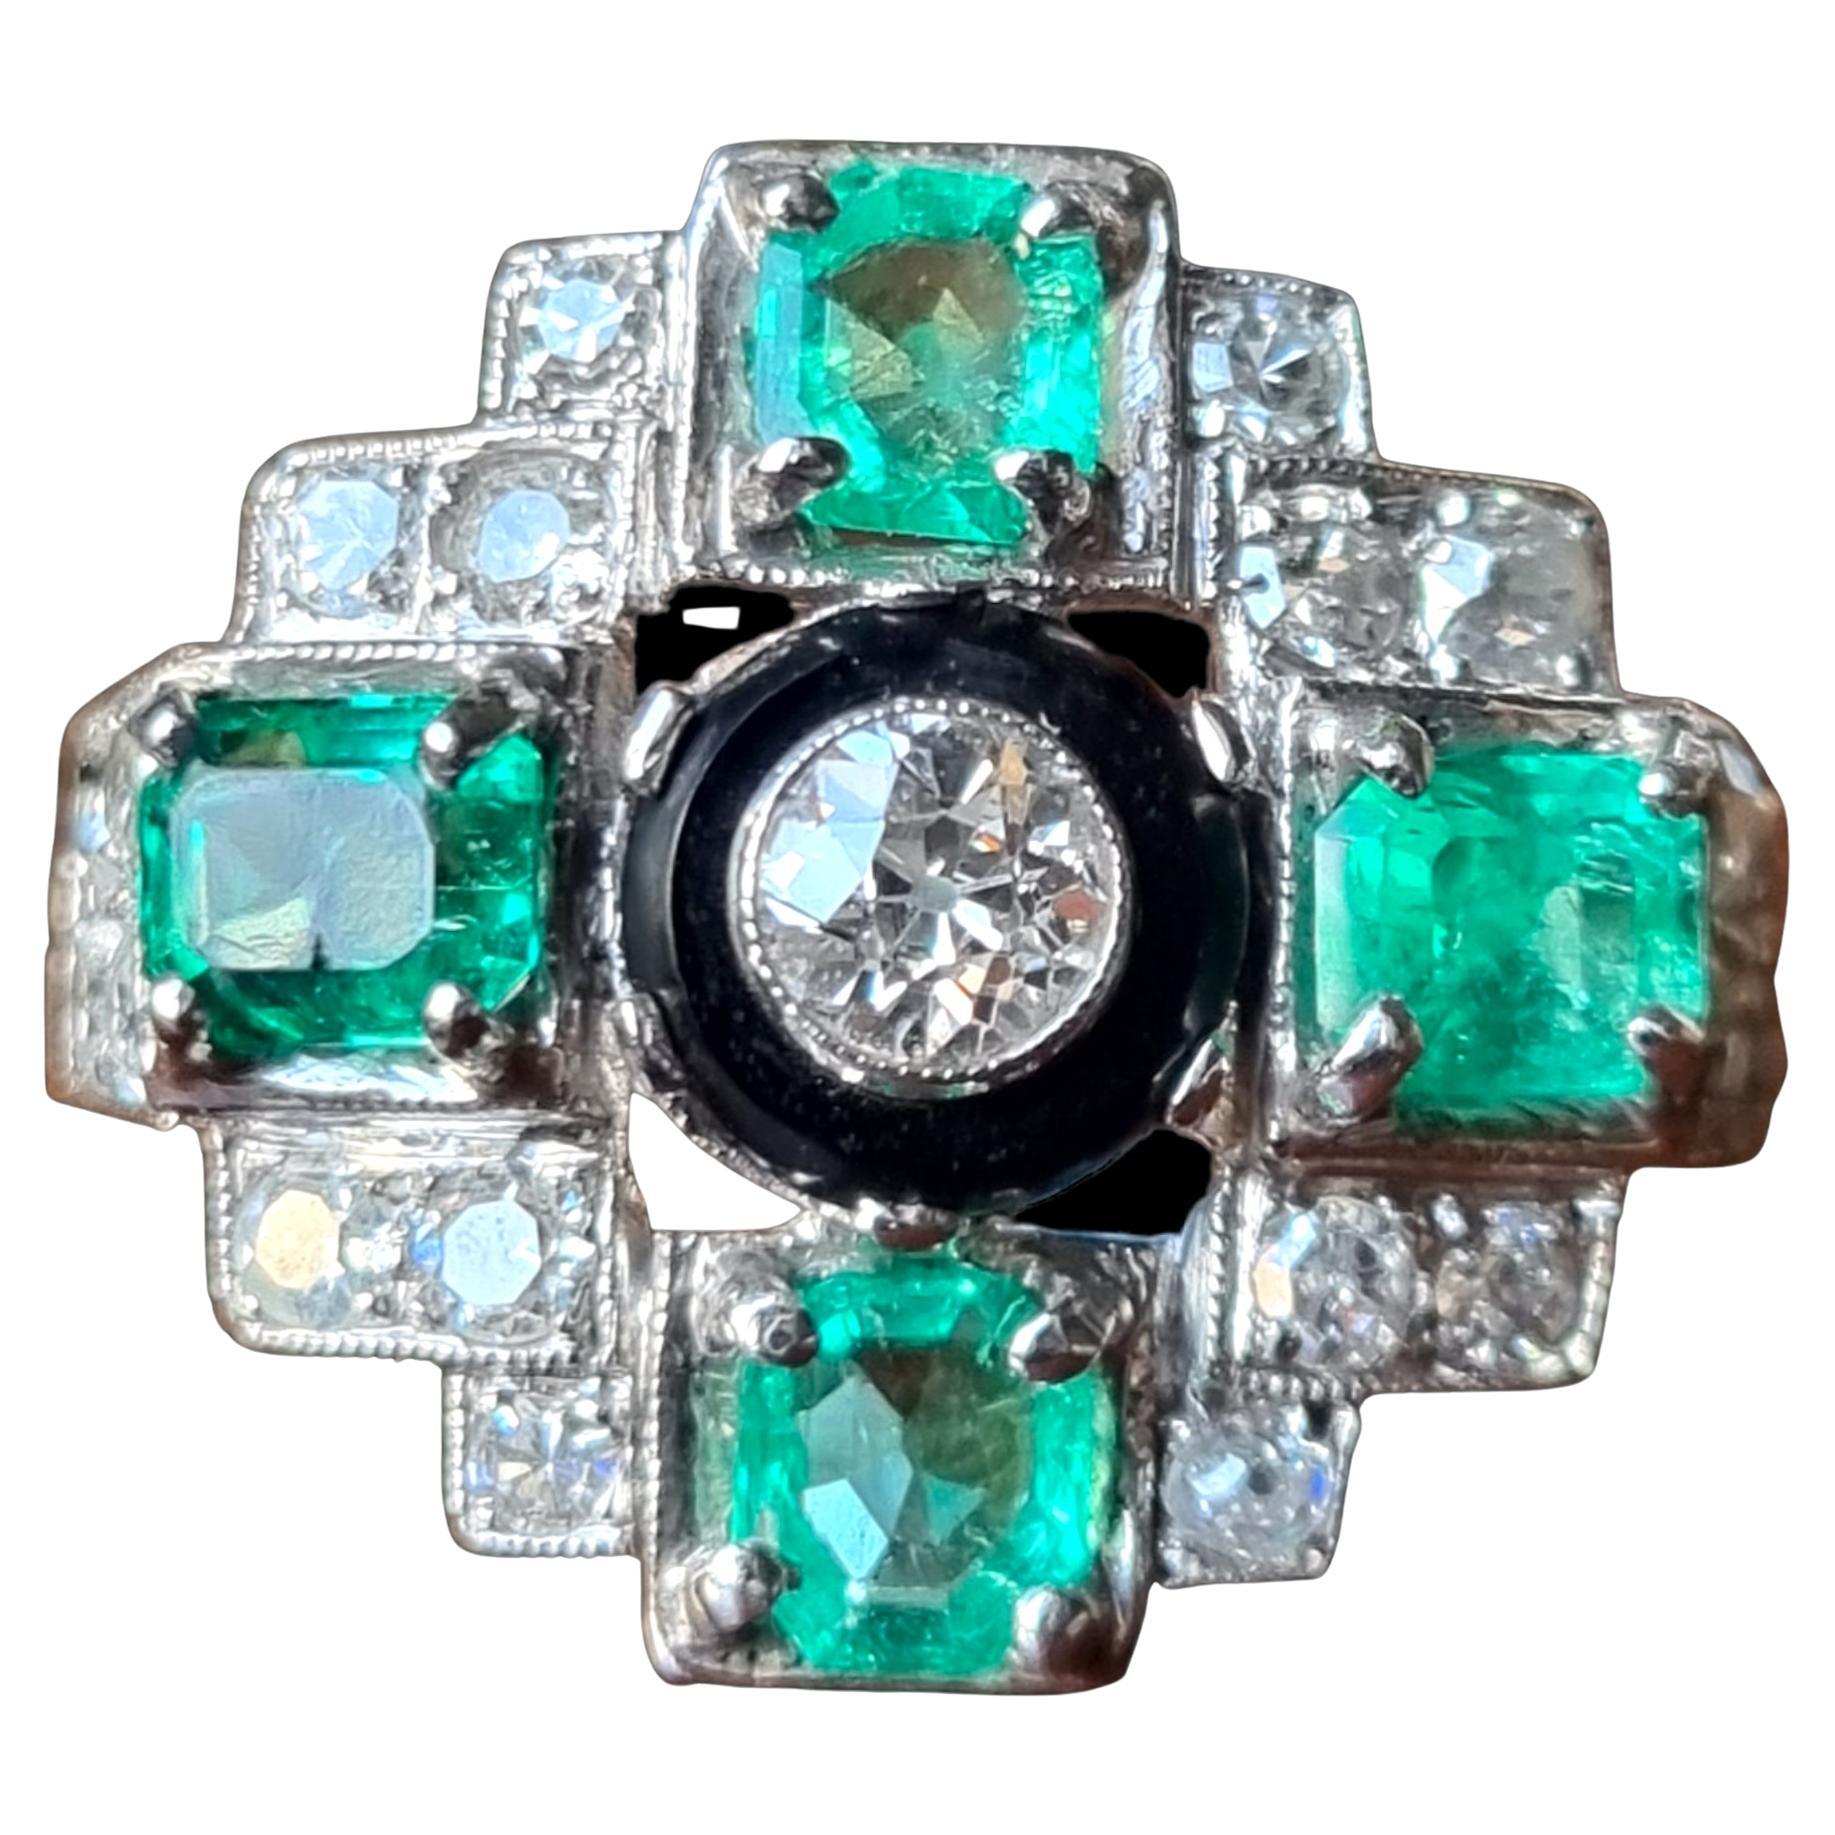 Art-Deco Style Cross Shaped Design Emerald, Diamond and Onyx Cocktail Ring For Sale